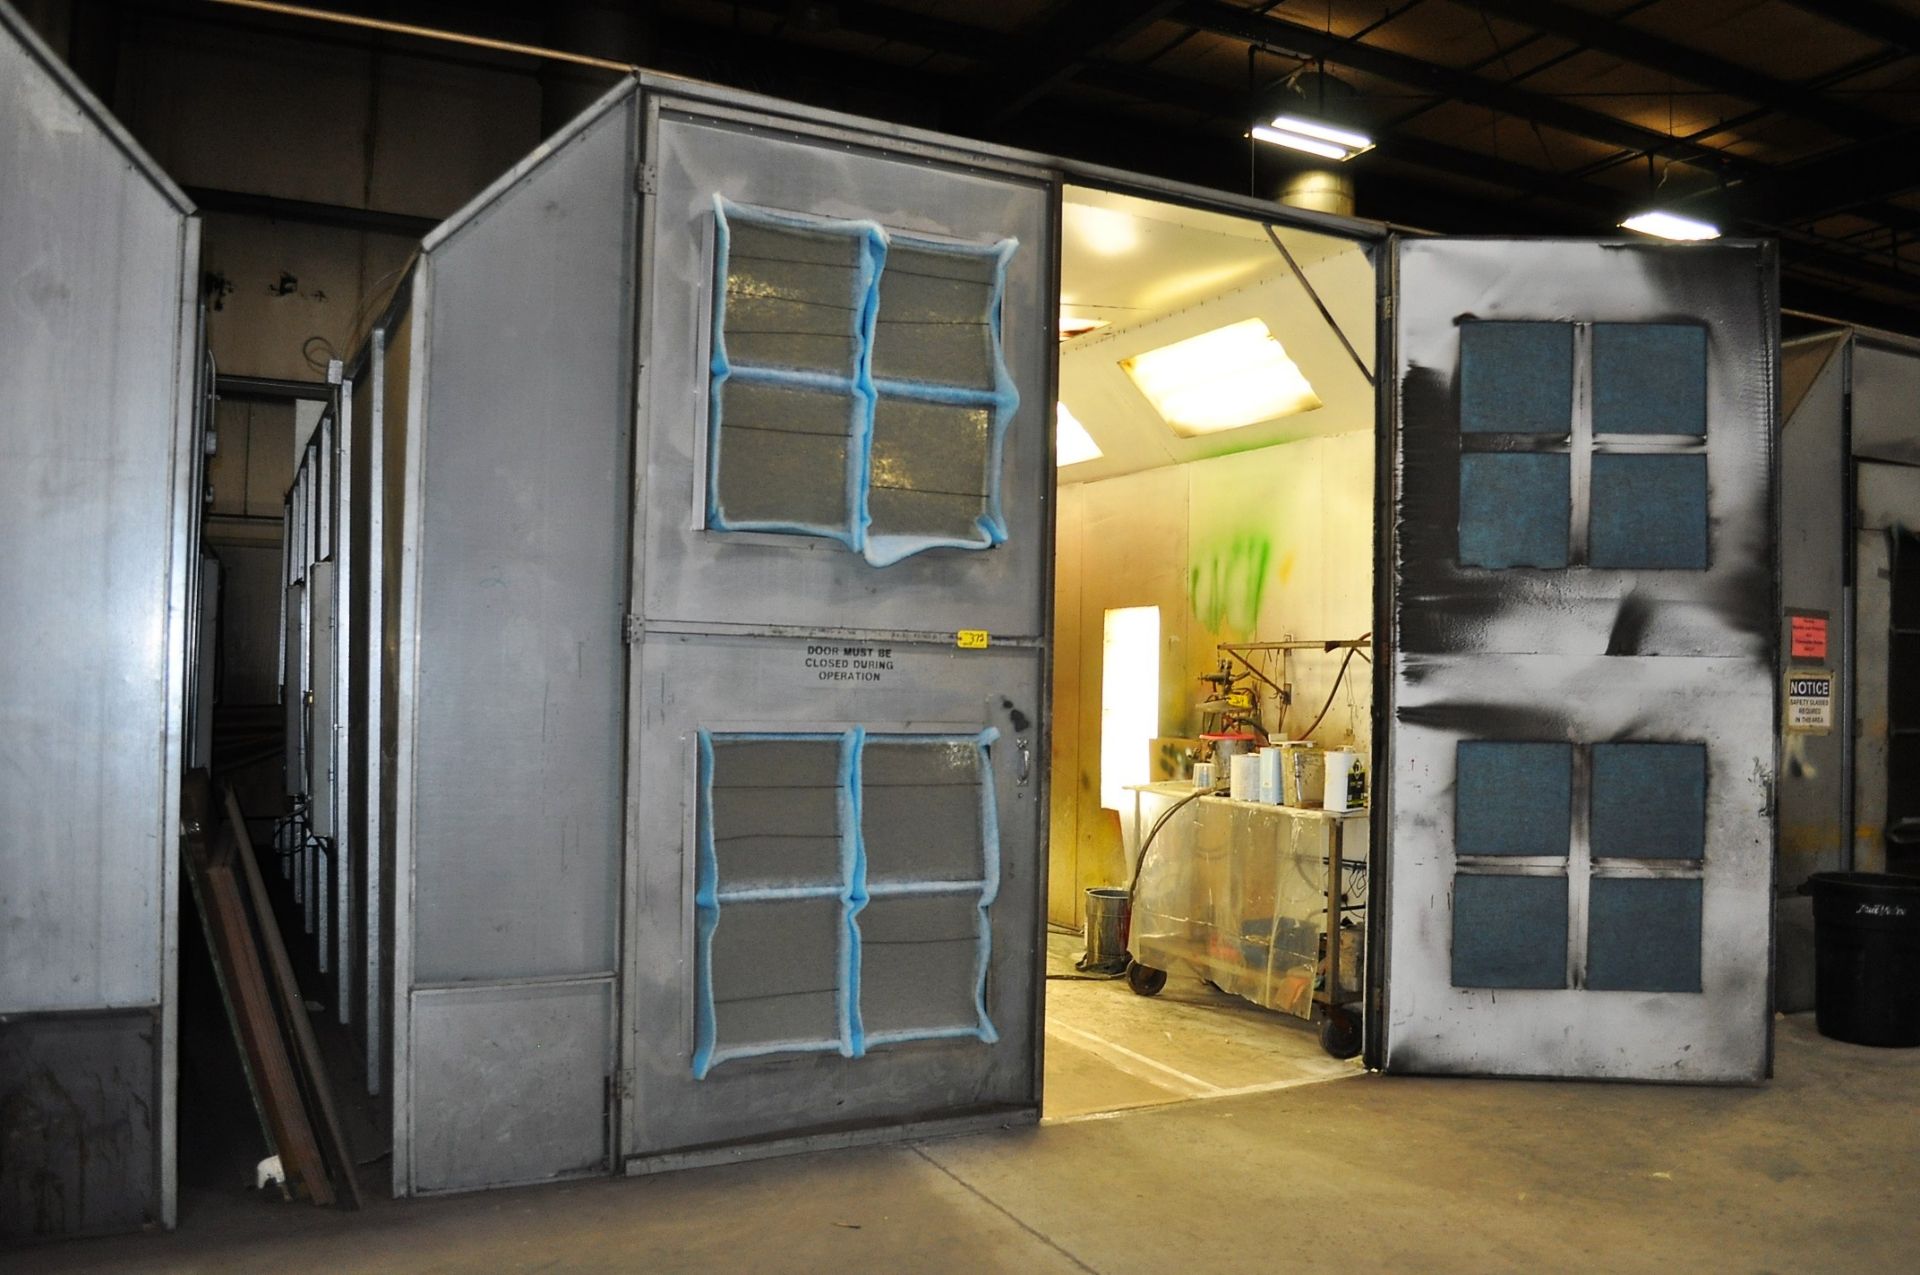 14' WIDE X 27' LONG X 12' HIGH PAINT BOOTH, DOUBLE DOOR, REAR EXHAUST SYSTEM - Image 4 of 4